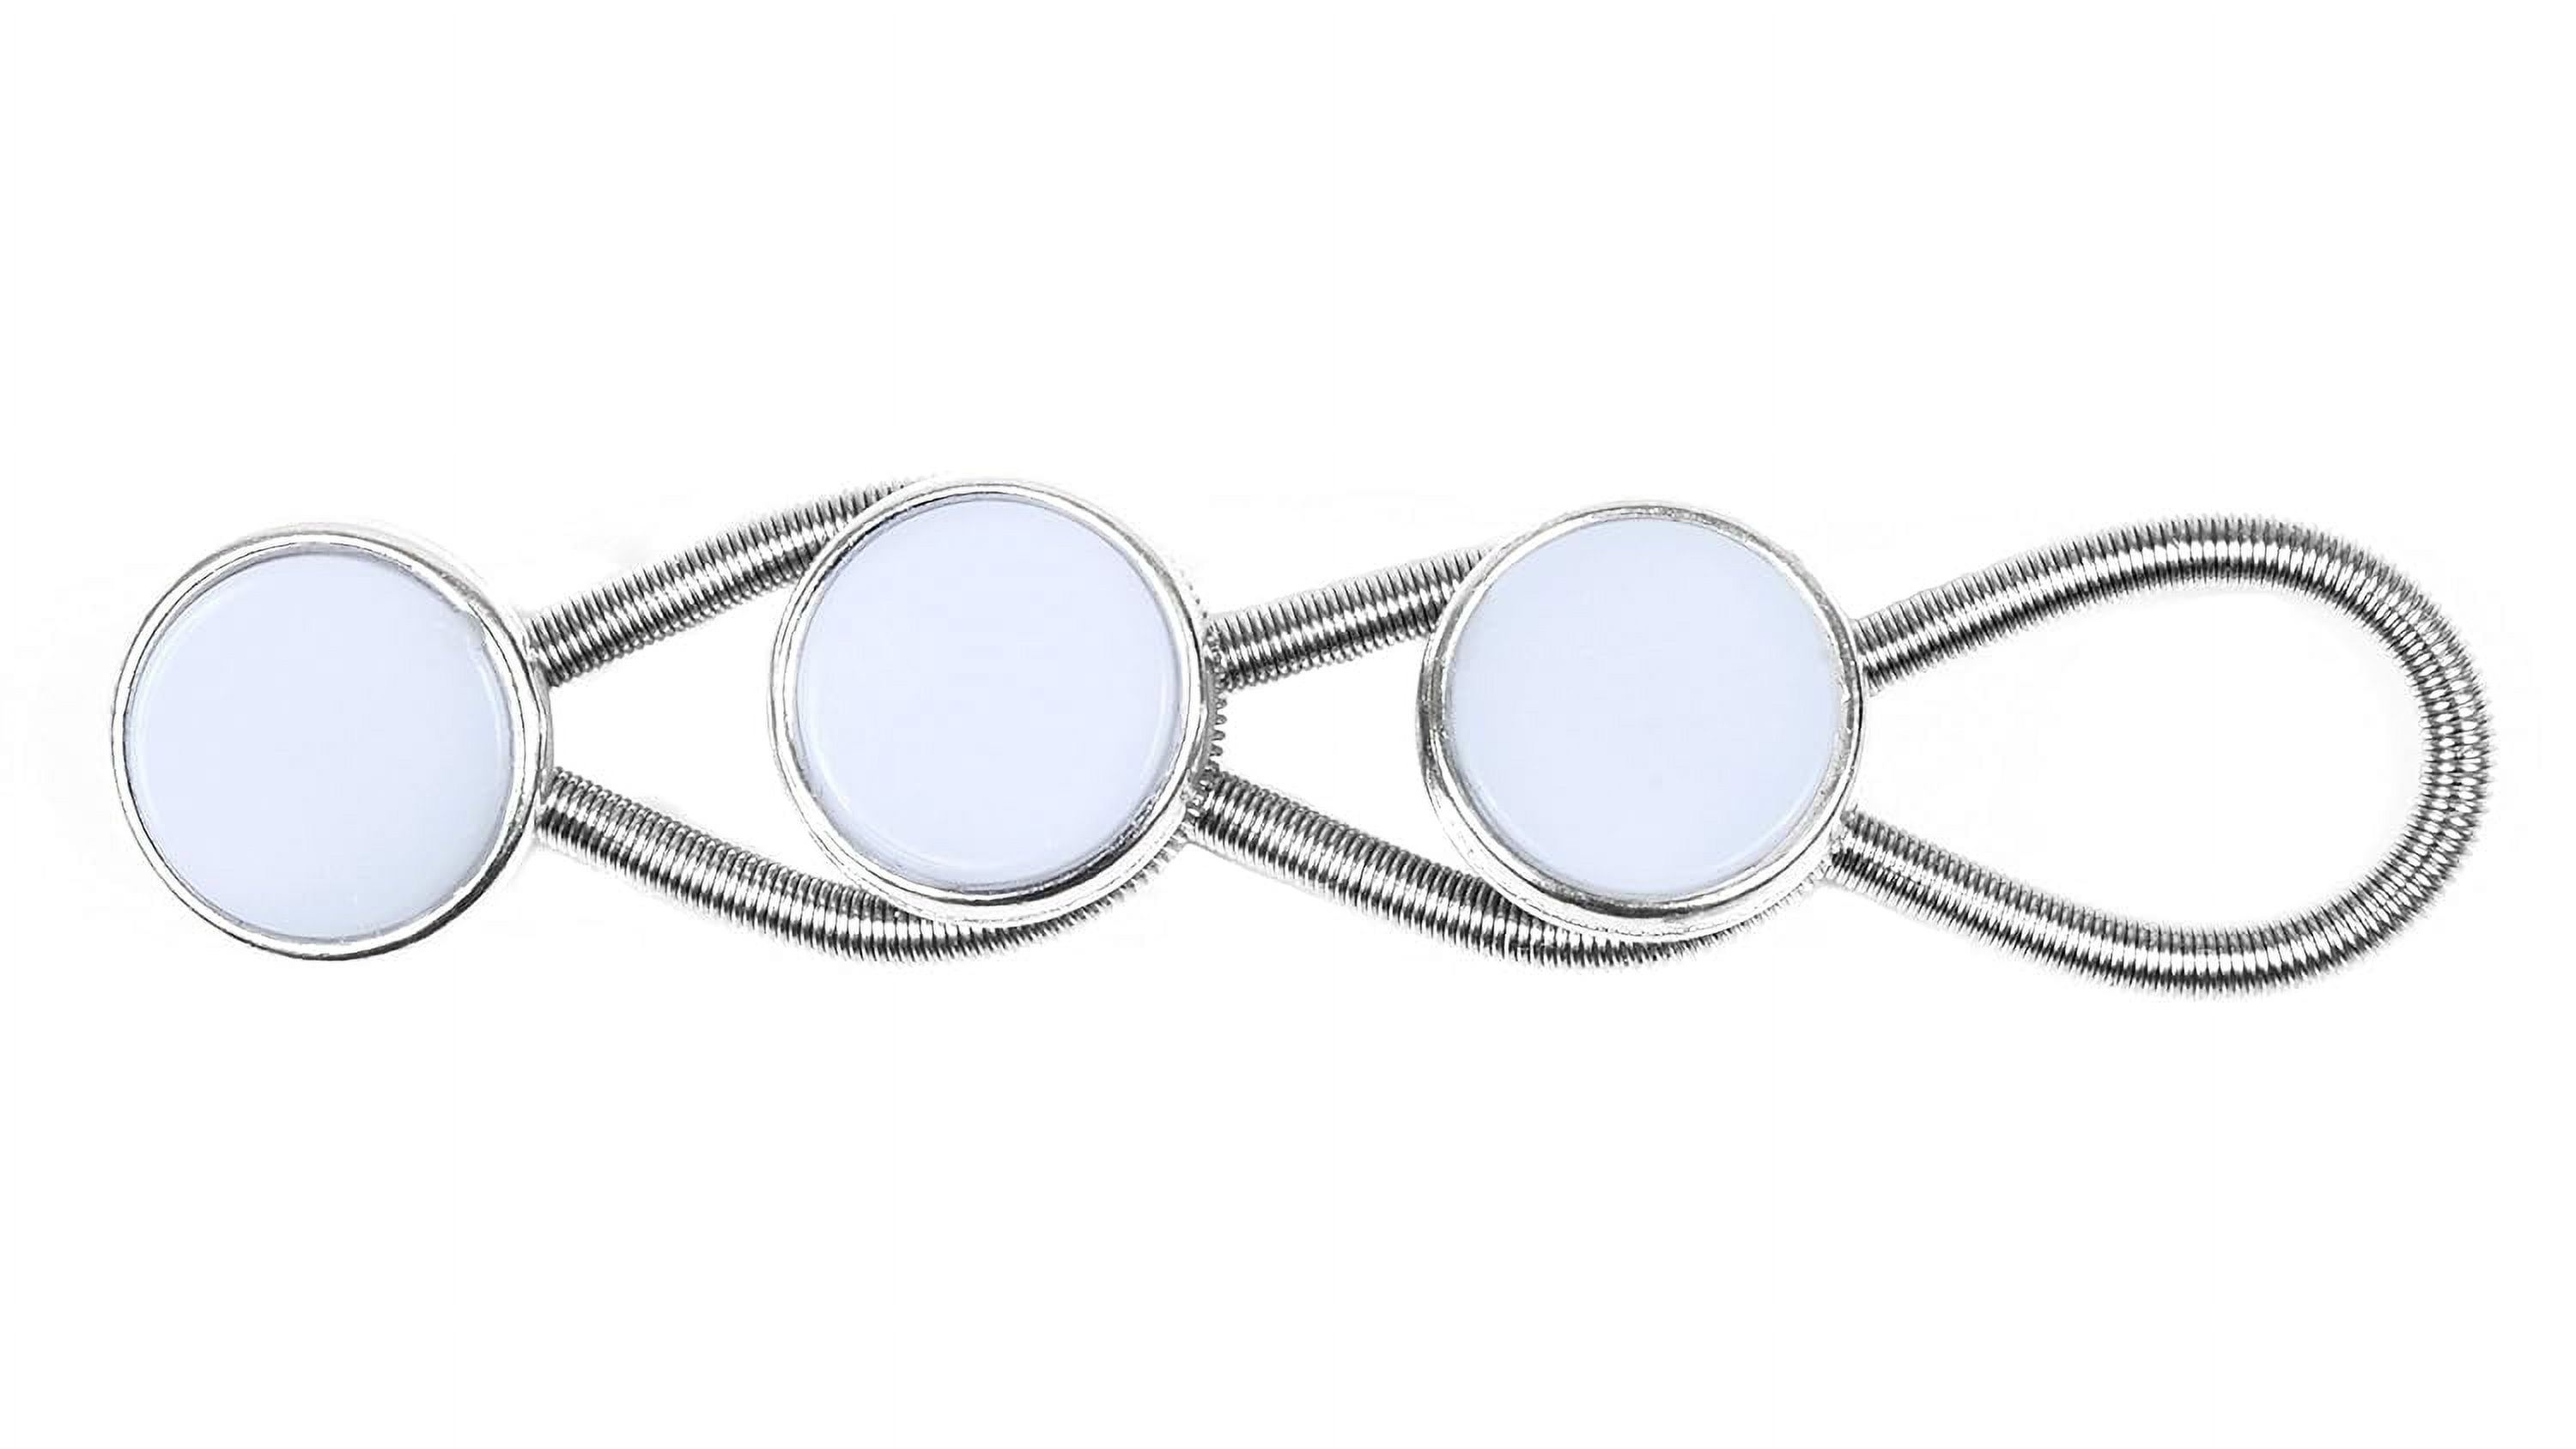 Comfy Clothiers Collar Extender - Men and Women's Shirt Button Extender -  Pack of 5 White Expanders with Durable, Soft and Elastic String - Neck  Extender for Dress Shirt or Blouse as